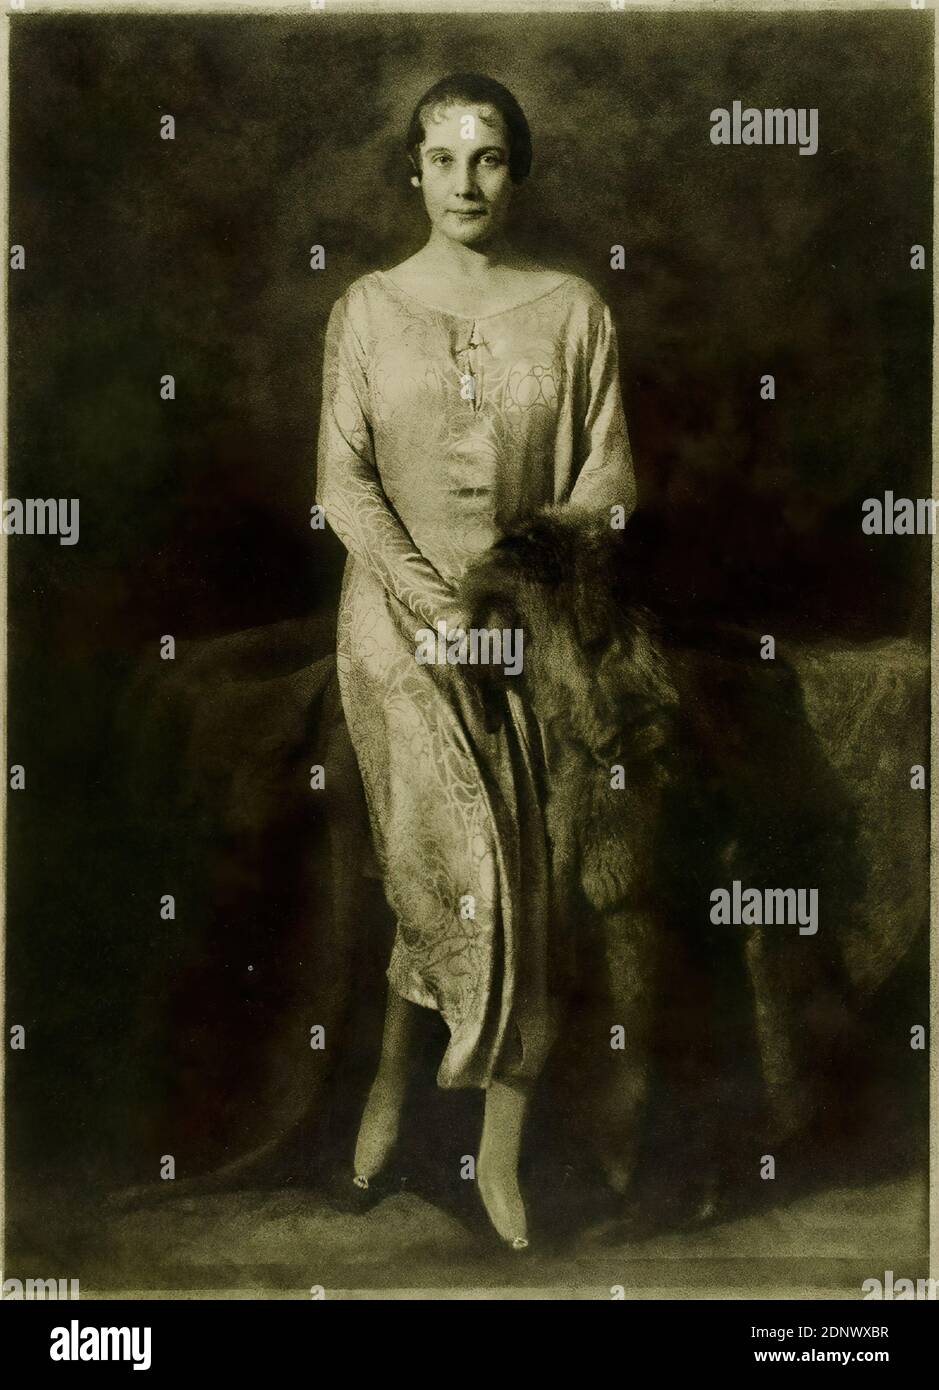 Franz Grainer, portrait of a woman, Staatliche Landesbildstelle Hamburg, collection on the history of photography, paper, brome oil print, image size: height: 41,1 cm; width: 29,8 cm, signed: recto u. re. in lead: Grainer, stamp: verso and left: stamp and object inscription of the Staatliche Landesbildstelle Hamburg, portrait photography, full-length portrait, en face (frontal view), fashion, clothing, woman, portrait, jacket, coat, cape Stock Photo